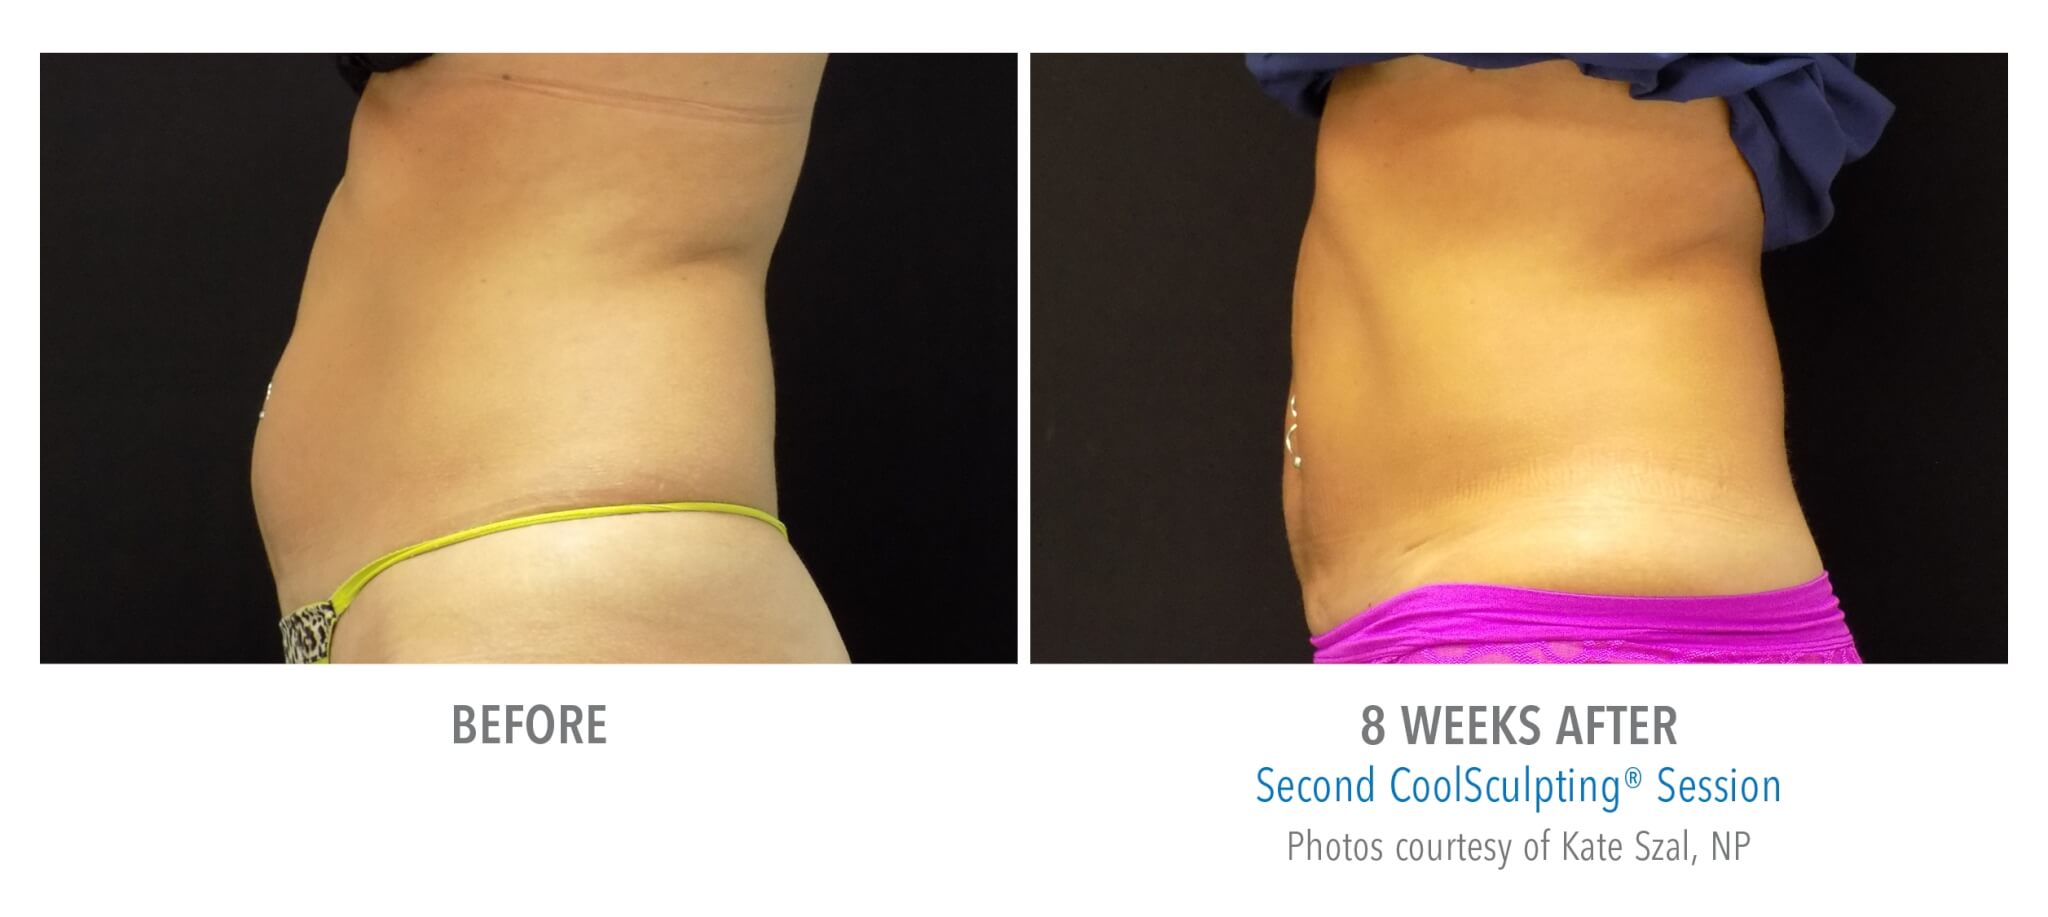 abdomen-side-2 coolsculpting patient before and after